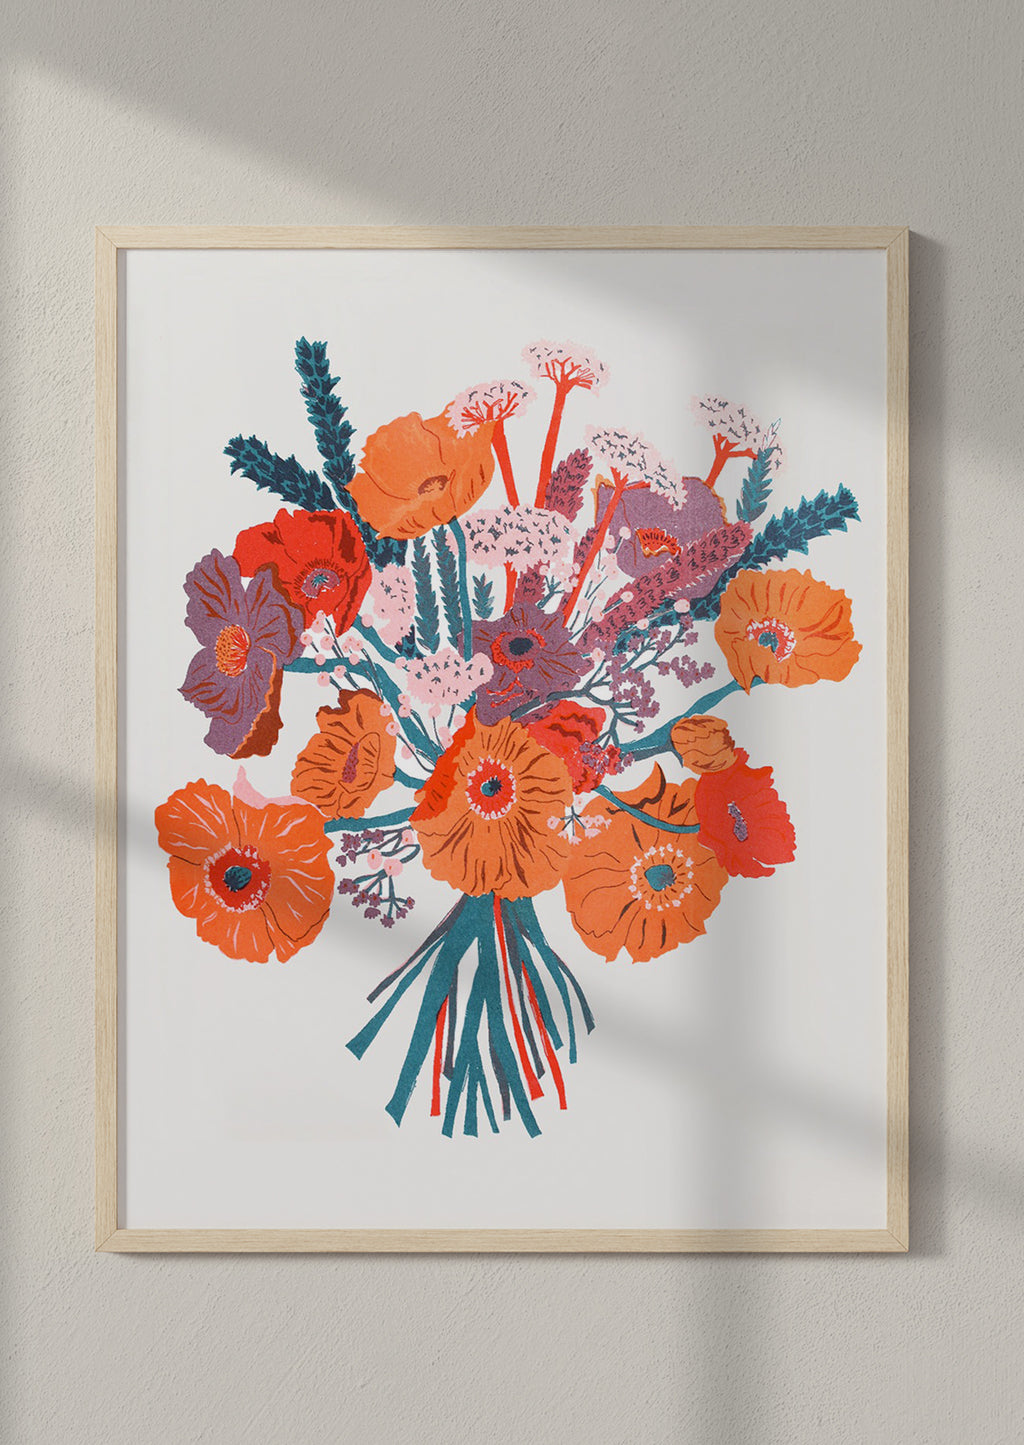 2: A risograph print with orange and red bouquet in wood frame.